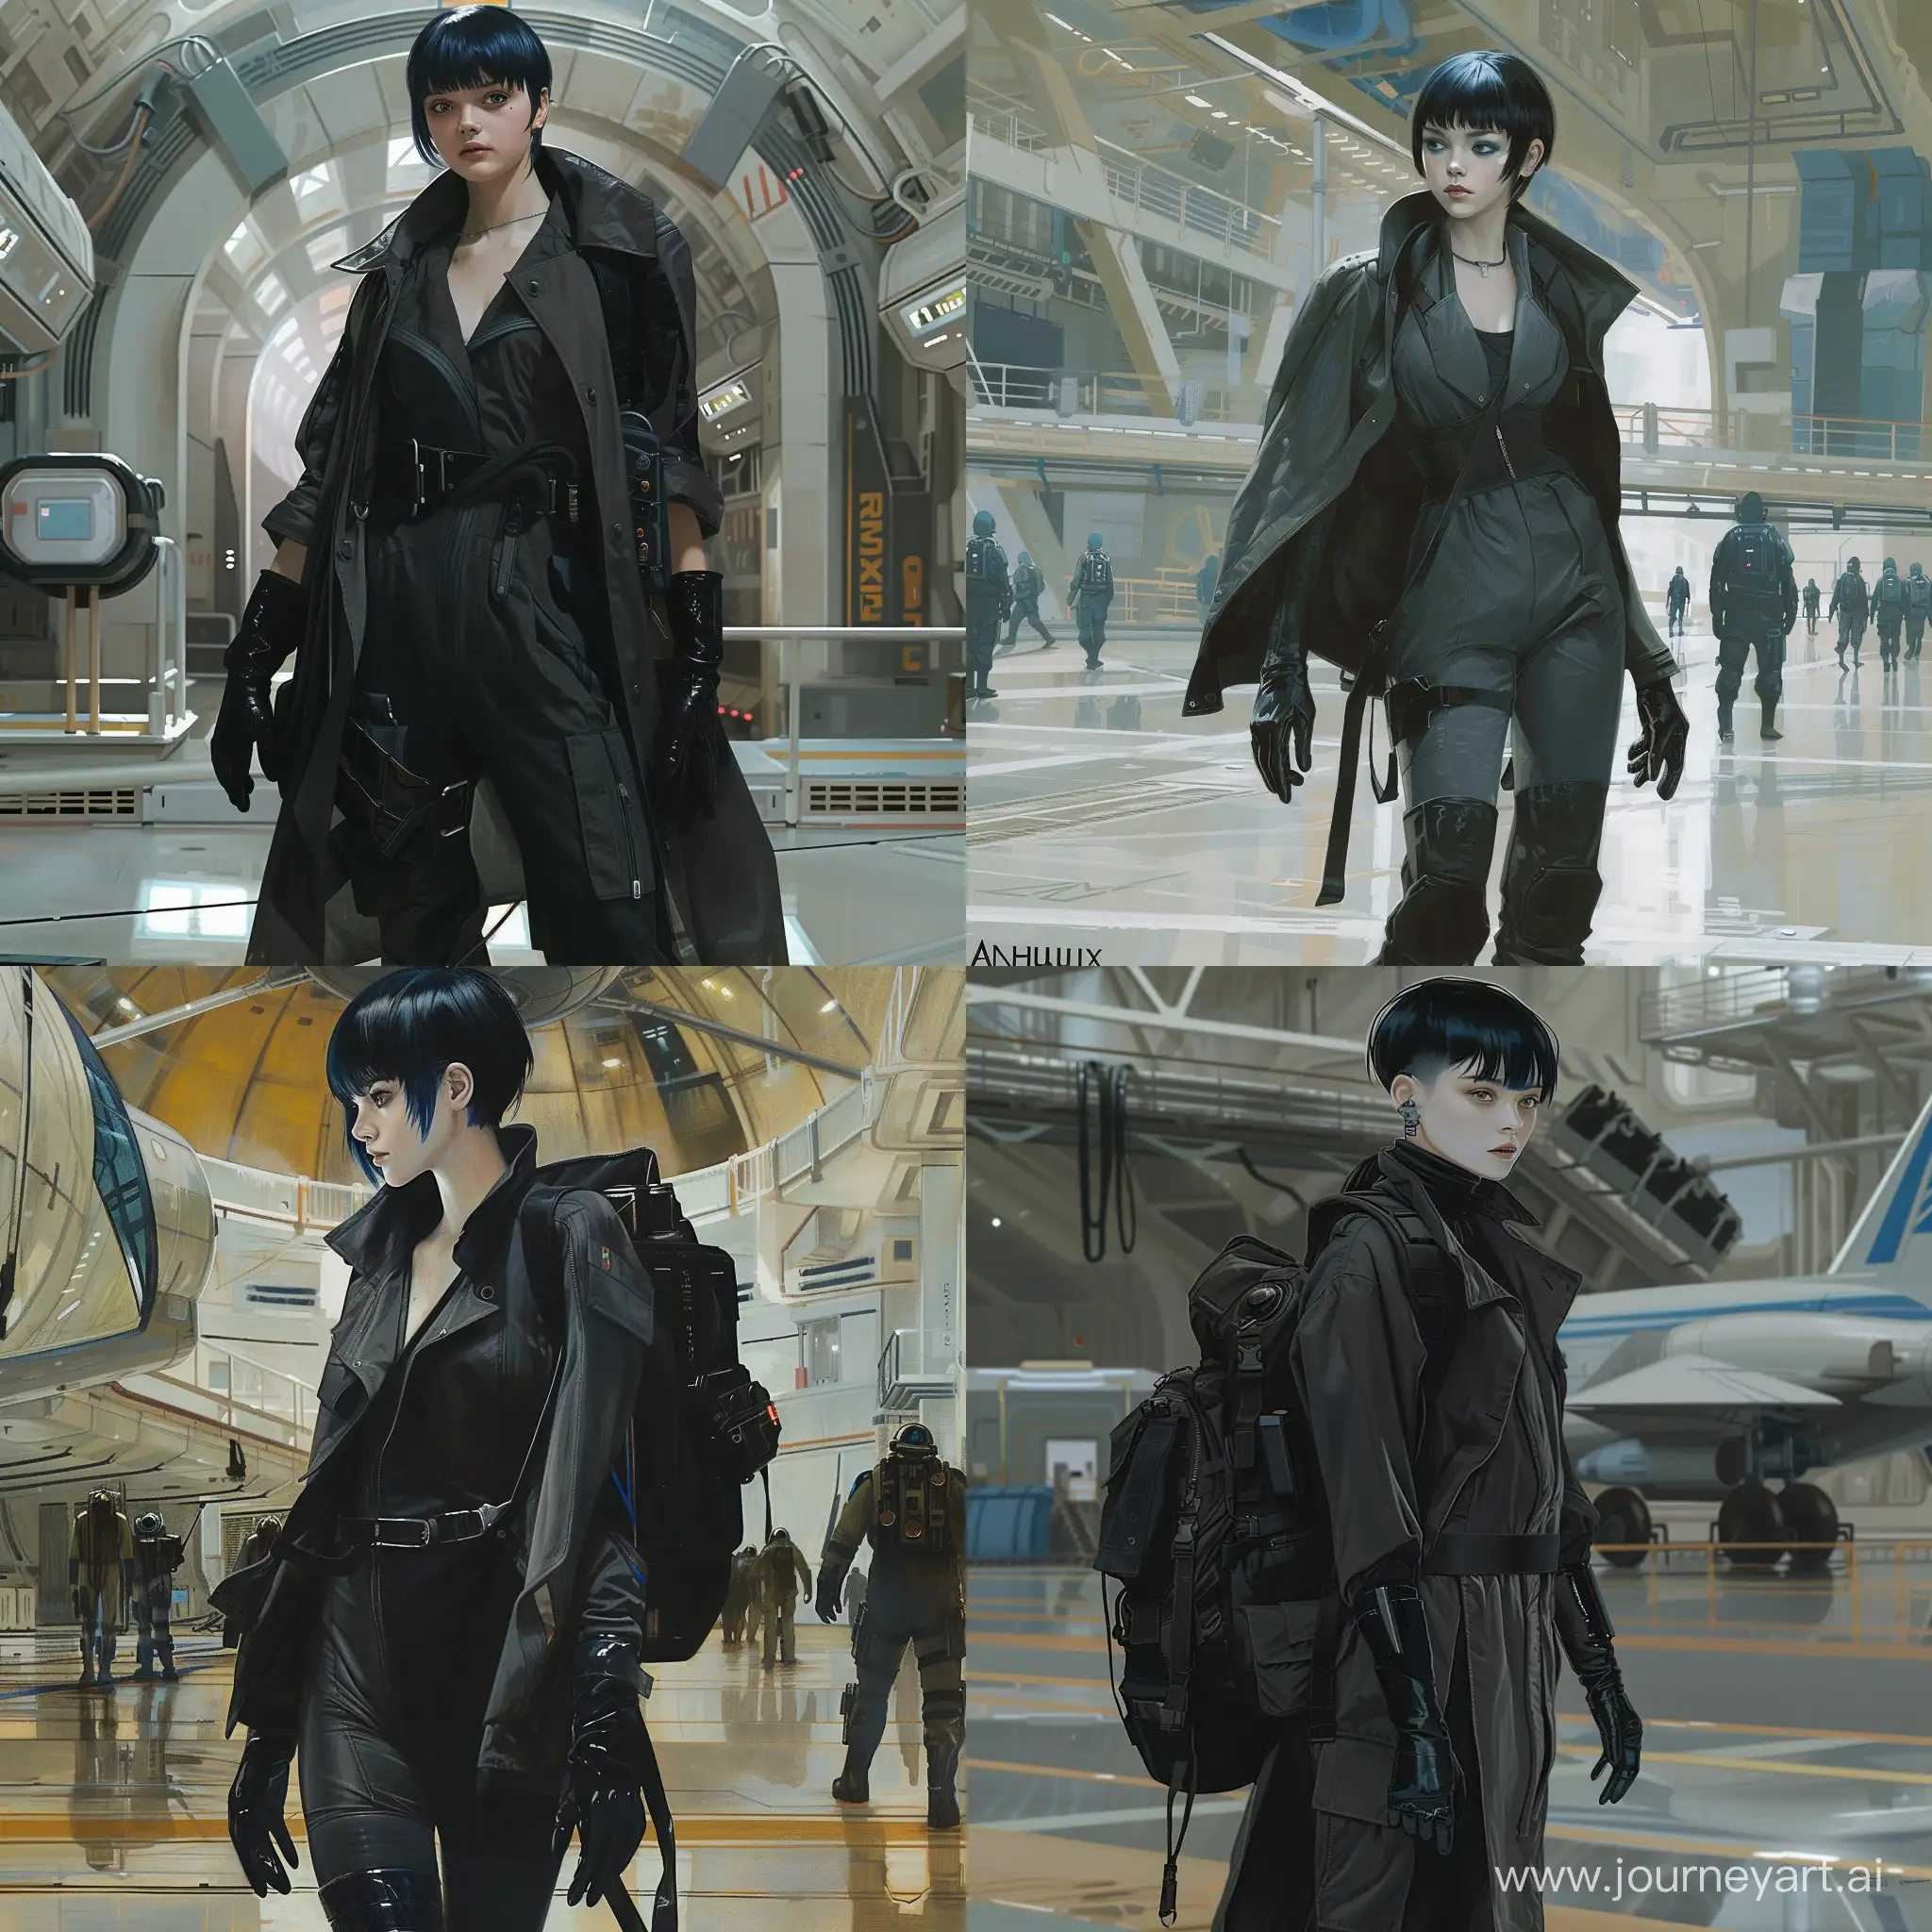 A tall young woman wearing wearing a black open trenchcoat over a dark gray jumpsuit with black rubber gloves and a black backpack. 
She has short black hair with blue tint in a pixie cut and pale white skin. She has a very slim build.
Futuristic, militarism
Painted by Ralph McQuarrie
Space station hall in the background